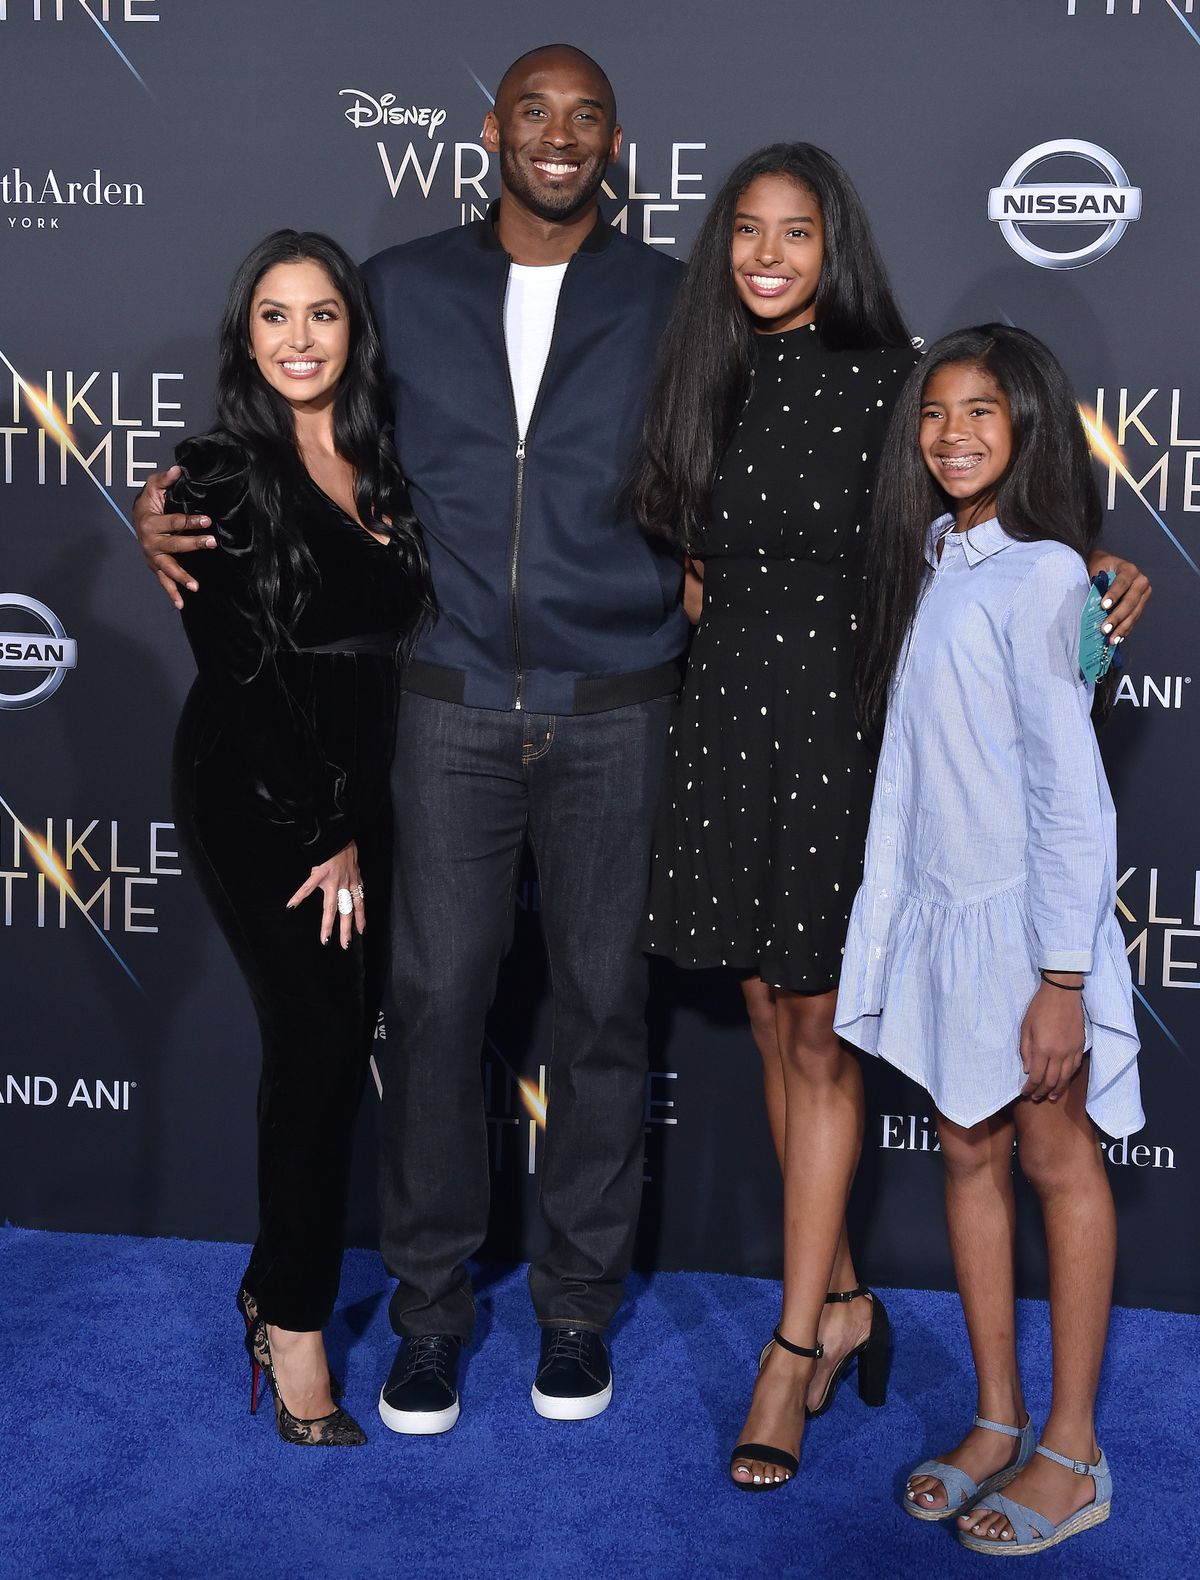 los angeles, ca   february 26  l r vanessa laine bryant, former nba player kobe bryant, natalia diamante bryant and gianna maria onore bryant arrive at the premiere of disney's 'a wrinkle in time' at el capitan theatre on february 26, 2018 in los angeles, california  photo by axellebauer griffinfilmmagic